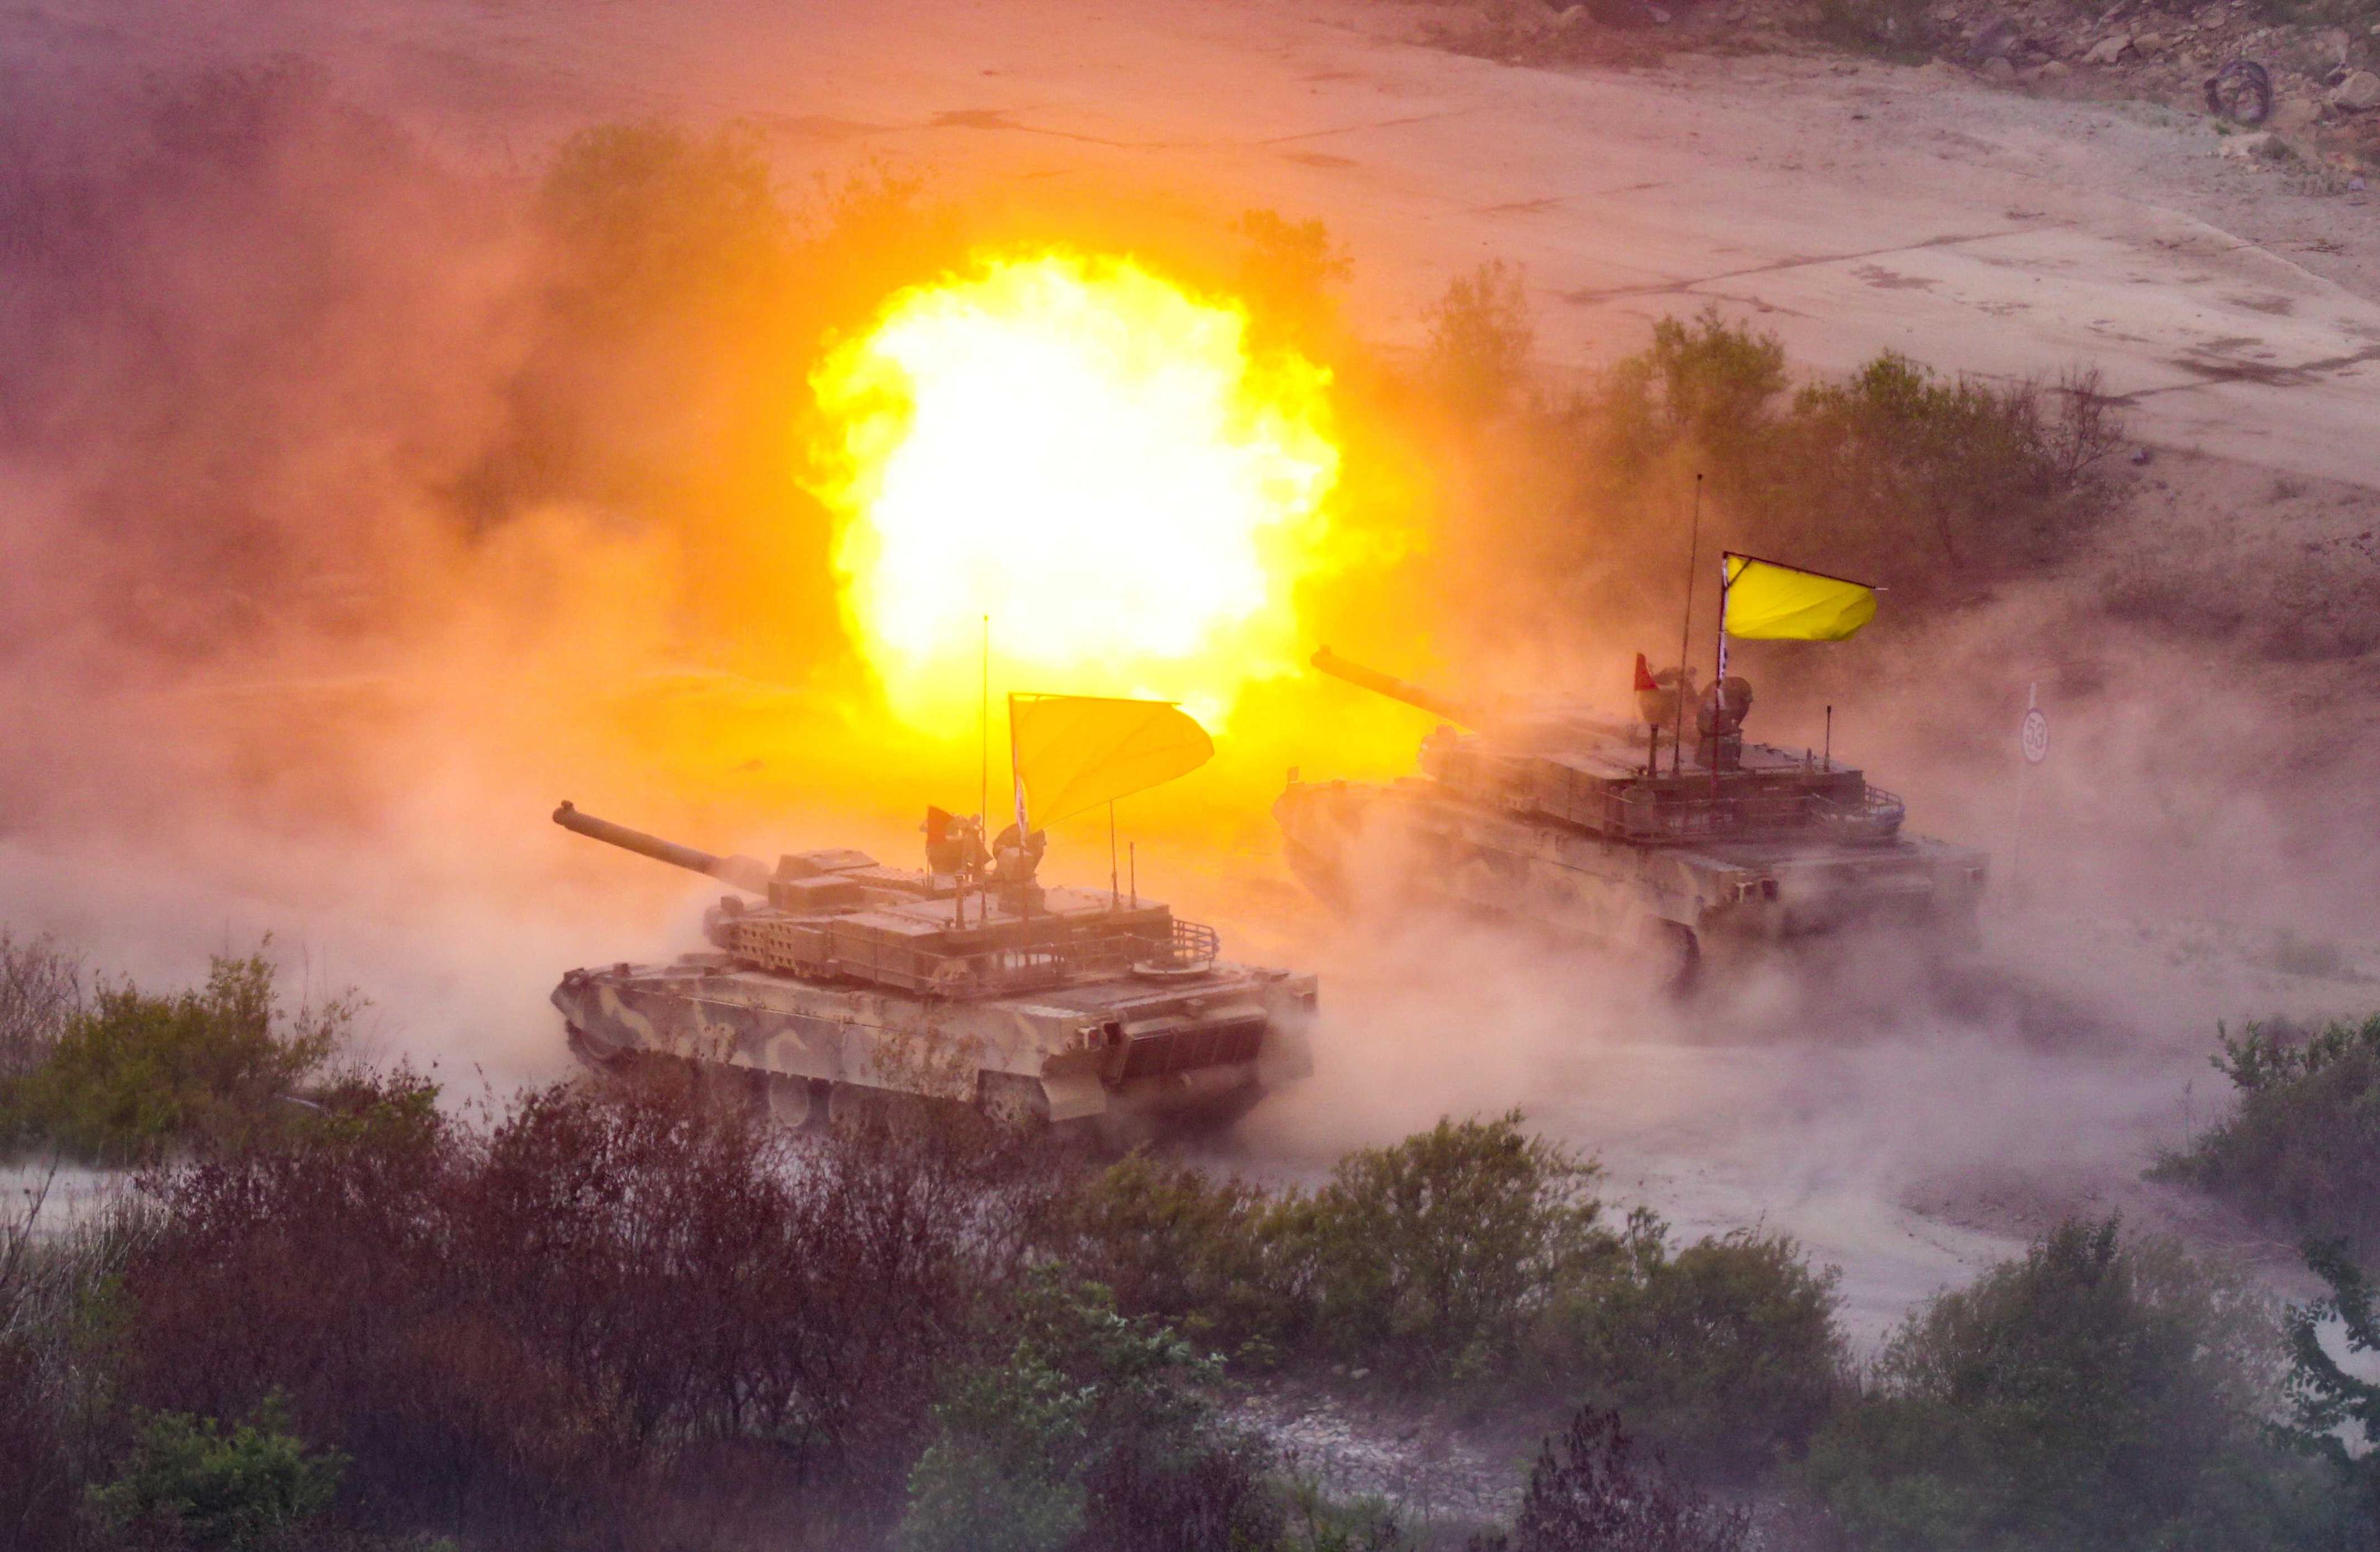 The South Korean army's K-2 tanks fire during South Korea-US joint military drills at Seungjin Fire Training Field in Pocheon, South Korea May 25. Photo: Reuters